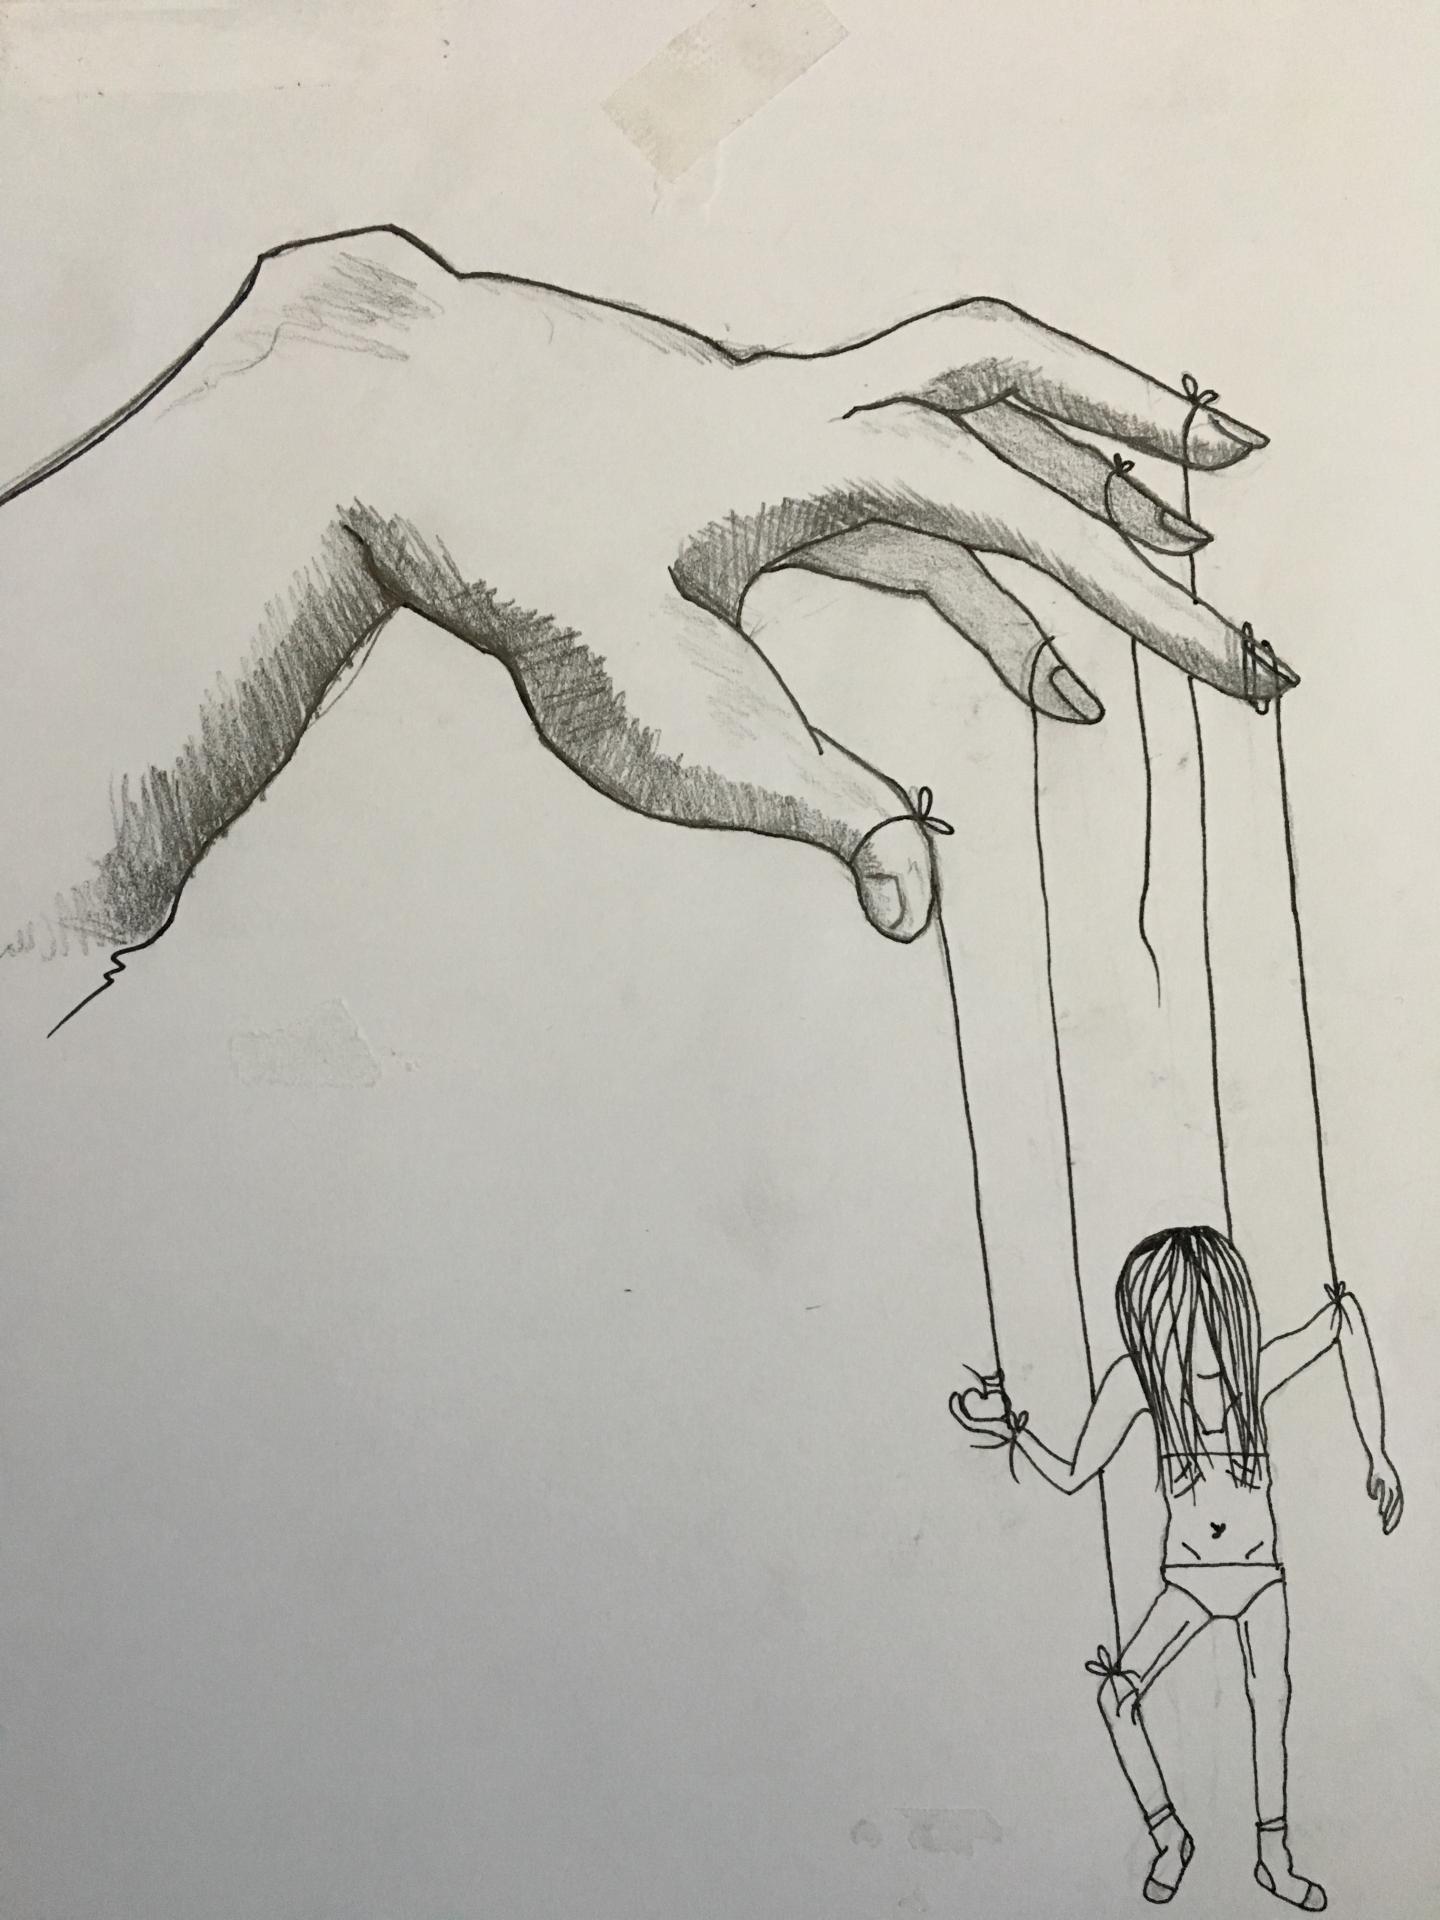 Sketch of a Patient's Perception of Living with Anorexia Nervosa